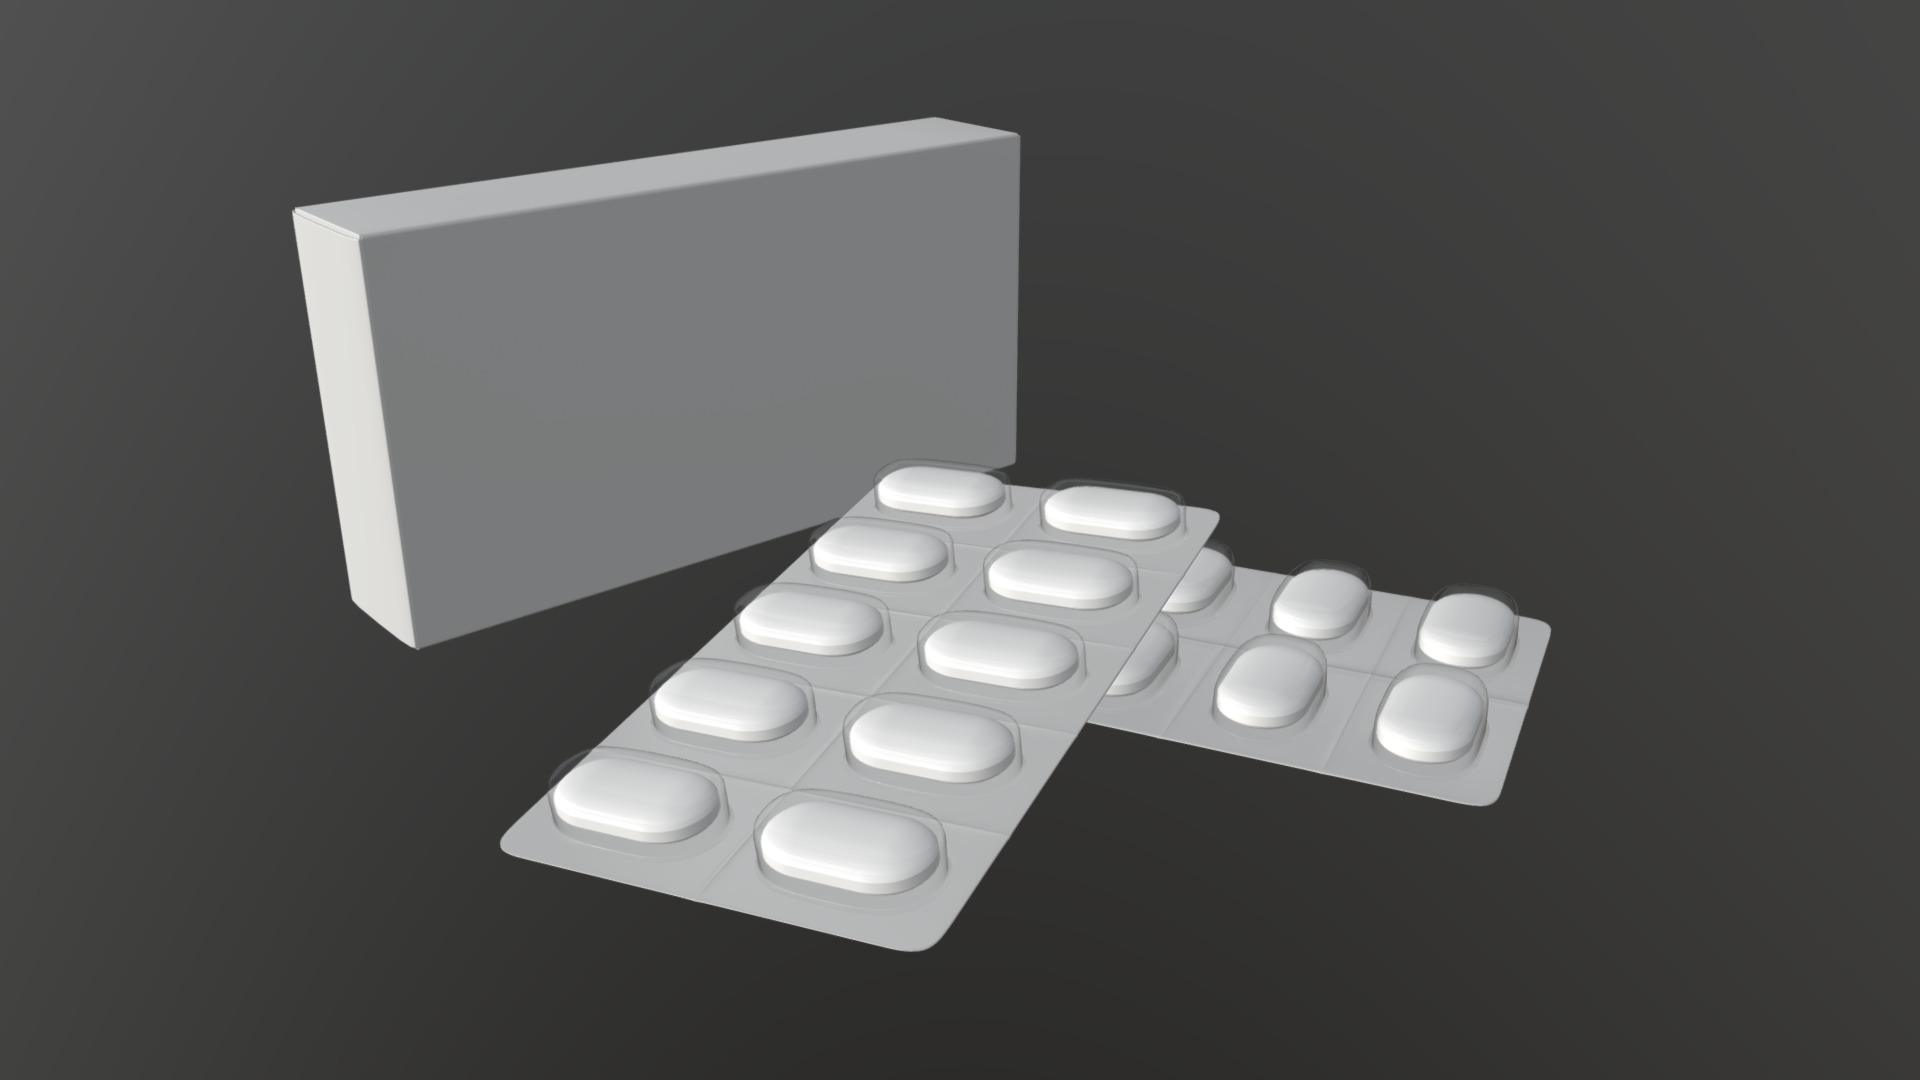 3D model pills in blister with box - This is a 3D model of the pills in blister with box. The 3D model is about a group of white plates.